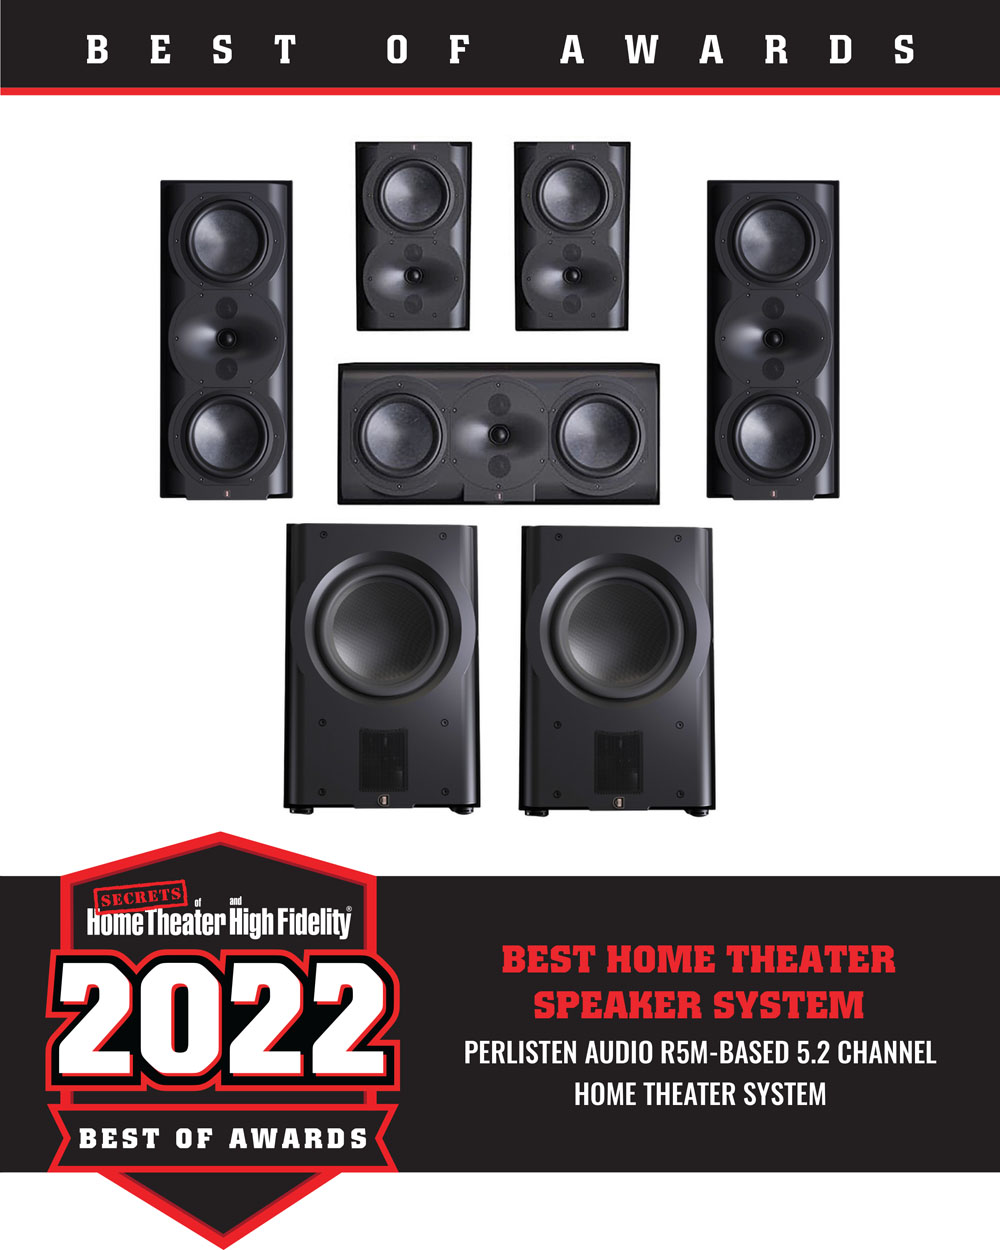 Perlisten Audio R5m-based 5.2 Channel Home Theater System Best of 2022 Award